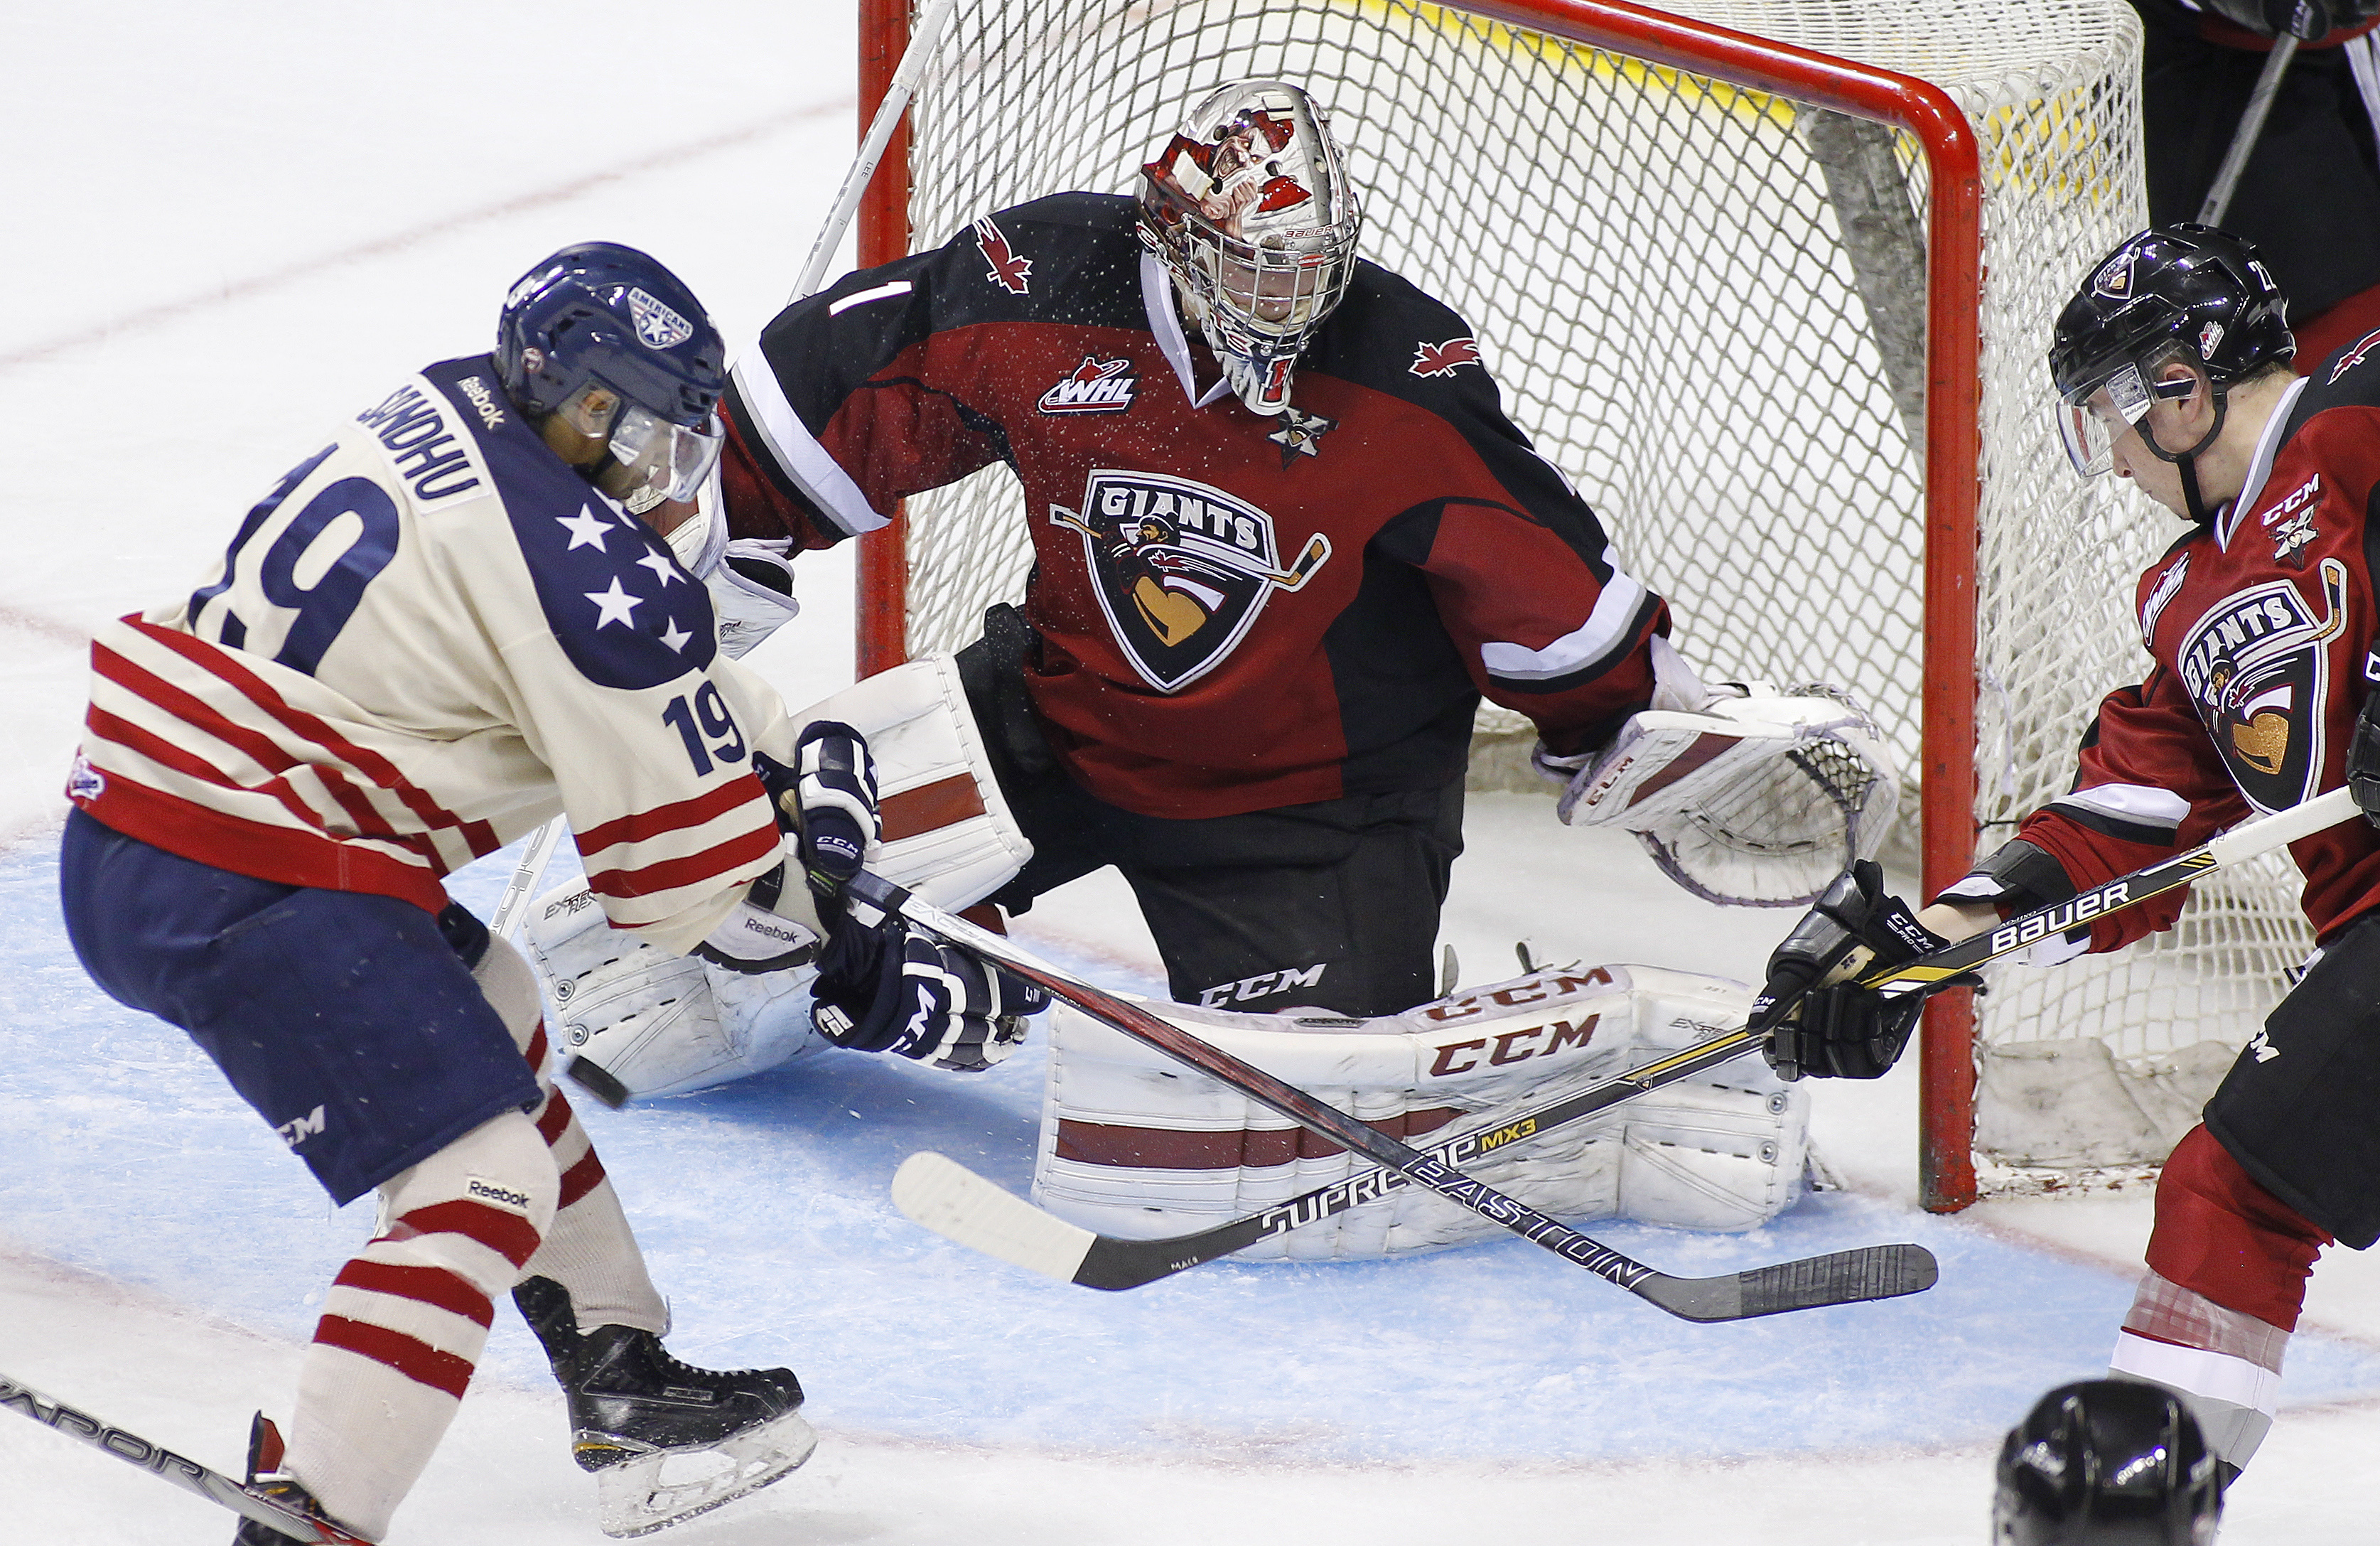 Tyler Sandhu and the Tri-City Americans were stifled Friday by Vancouver netminder Payton Lee in a 2-1 loss to the Giants. The Ams rebounded Saturday by defeating Portland.